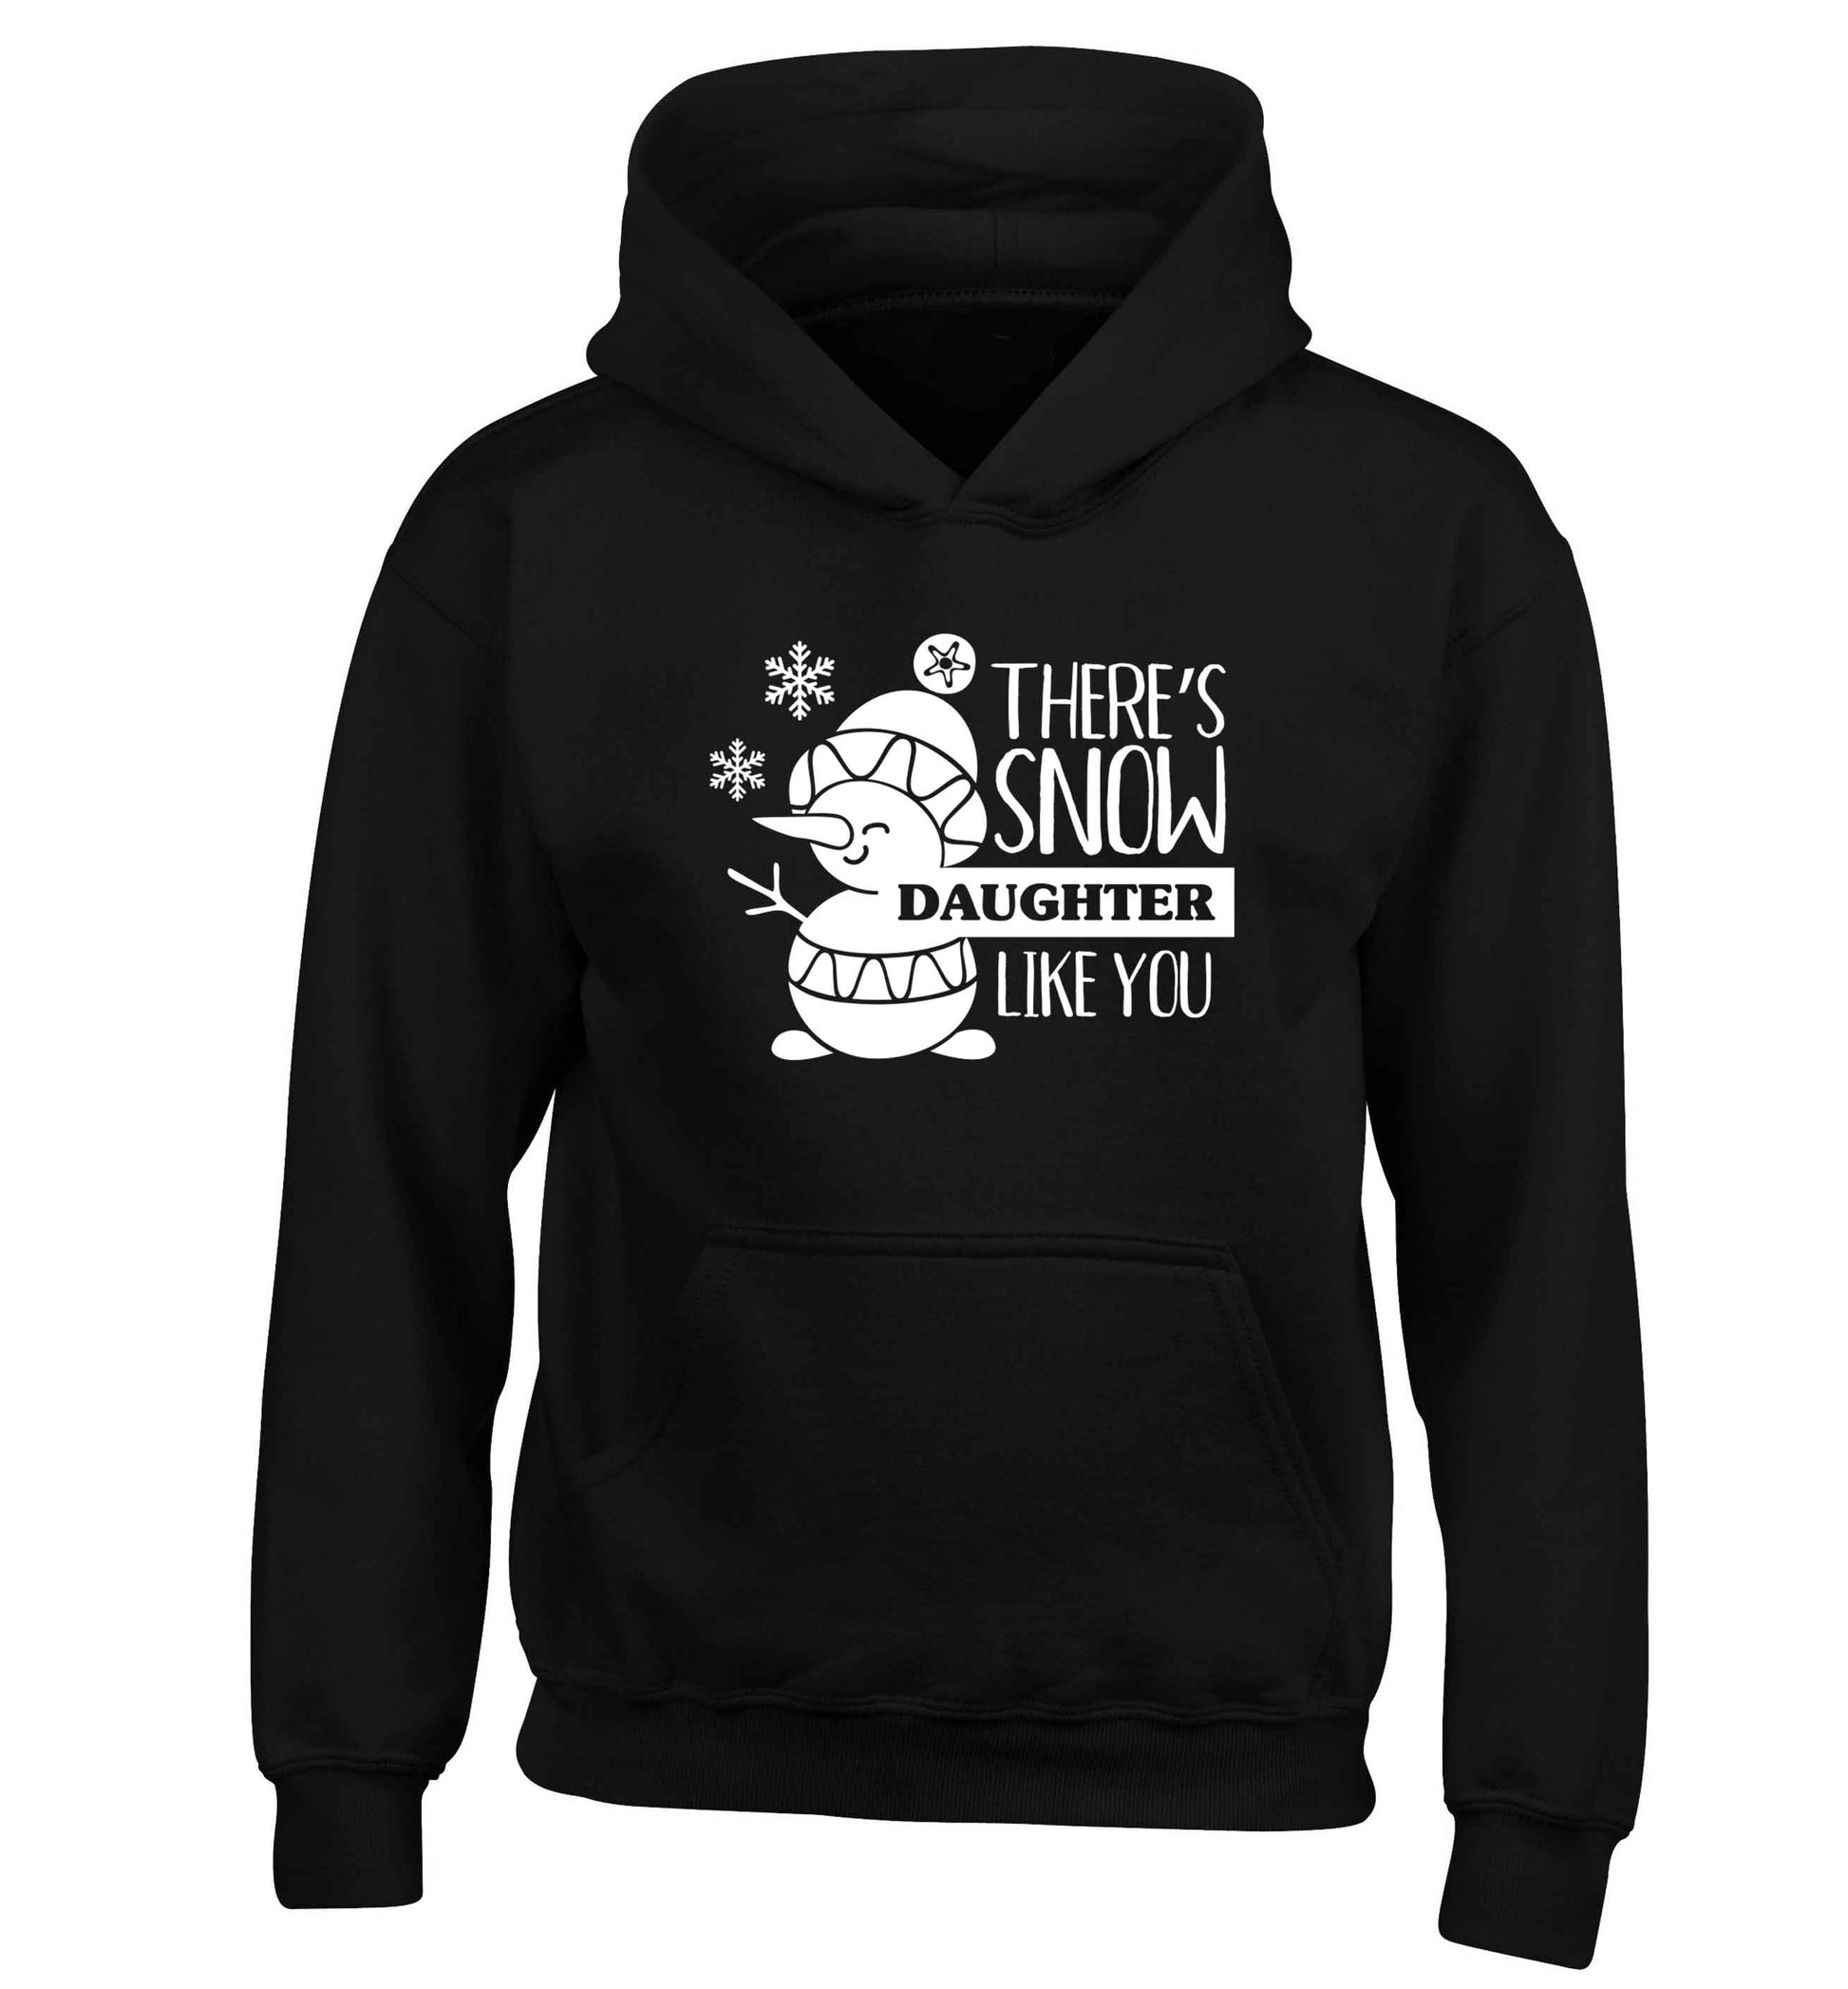 There's snow daughter like you children's black hoodie 12-13 Years